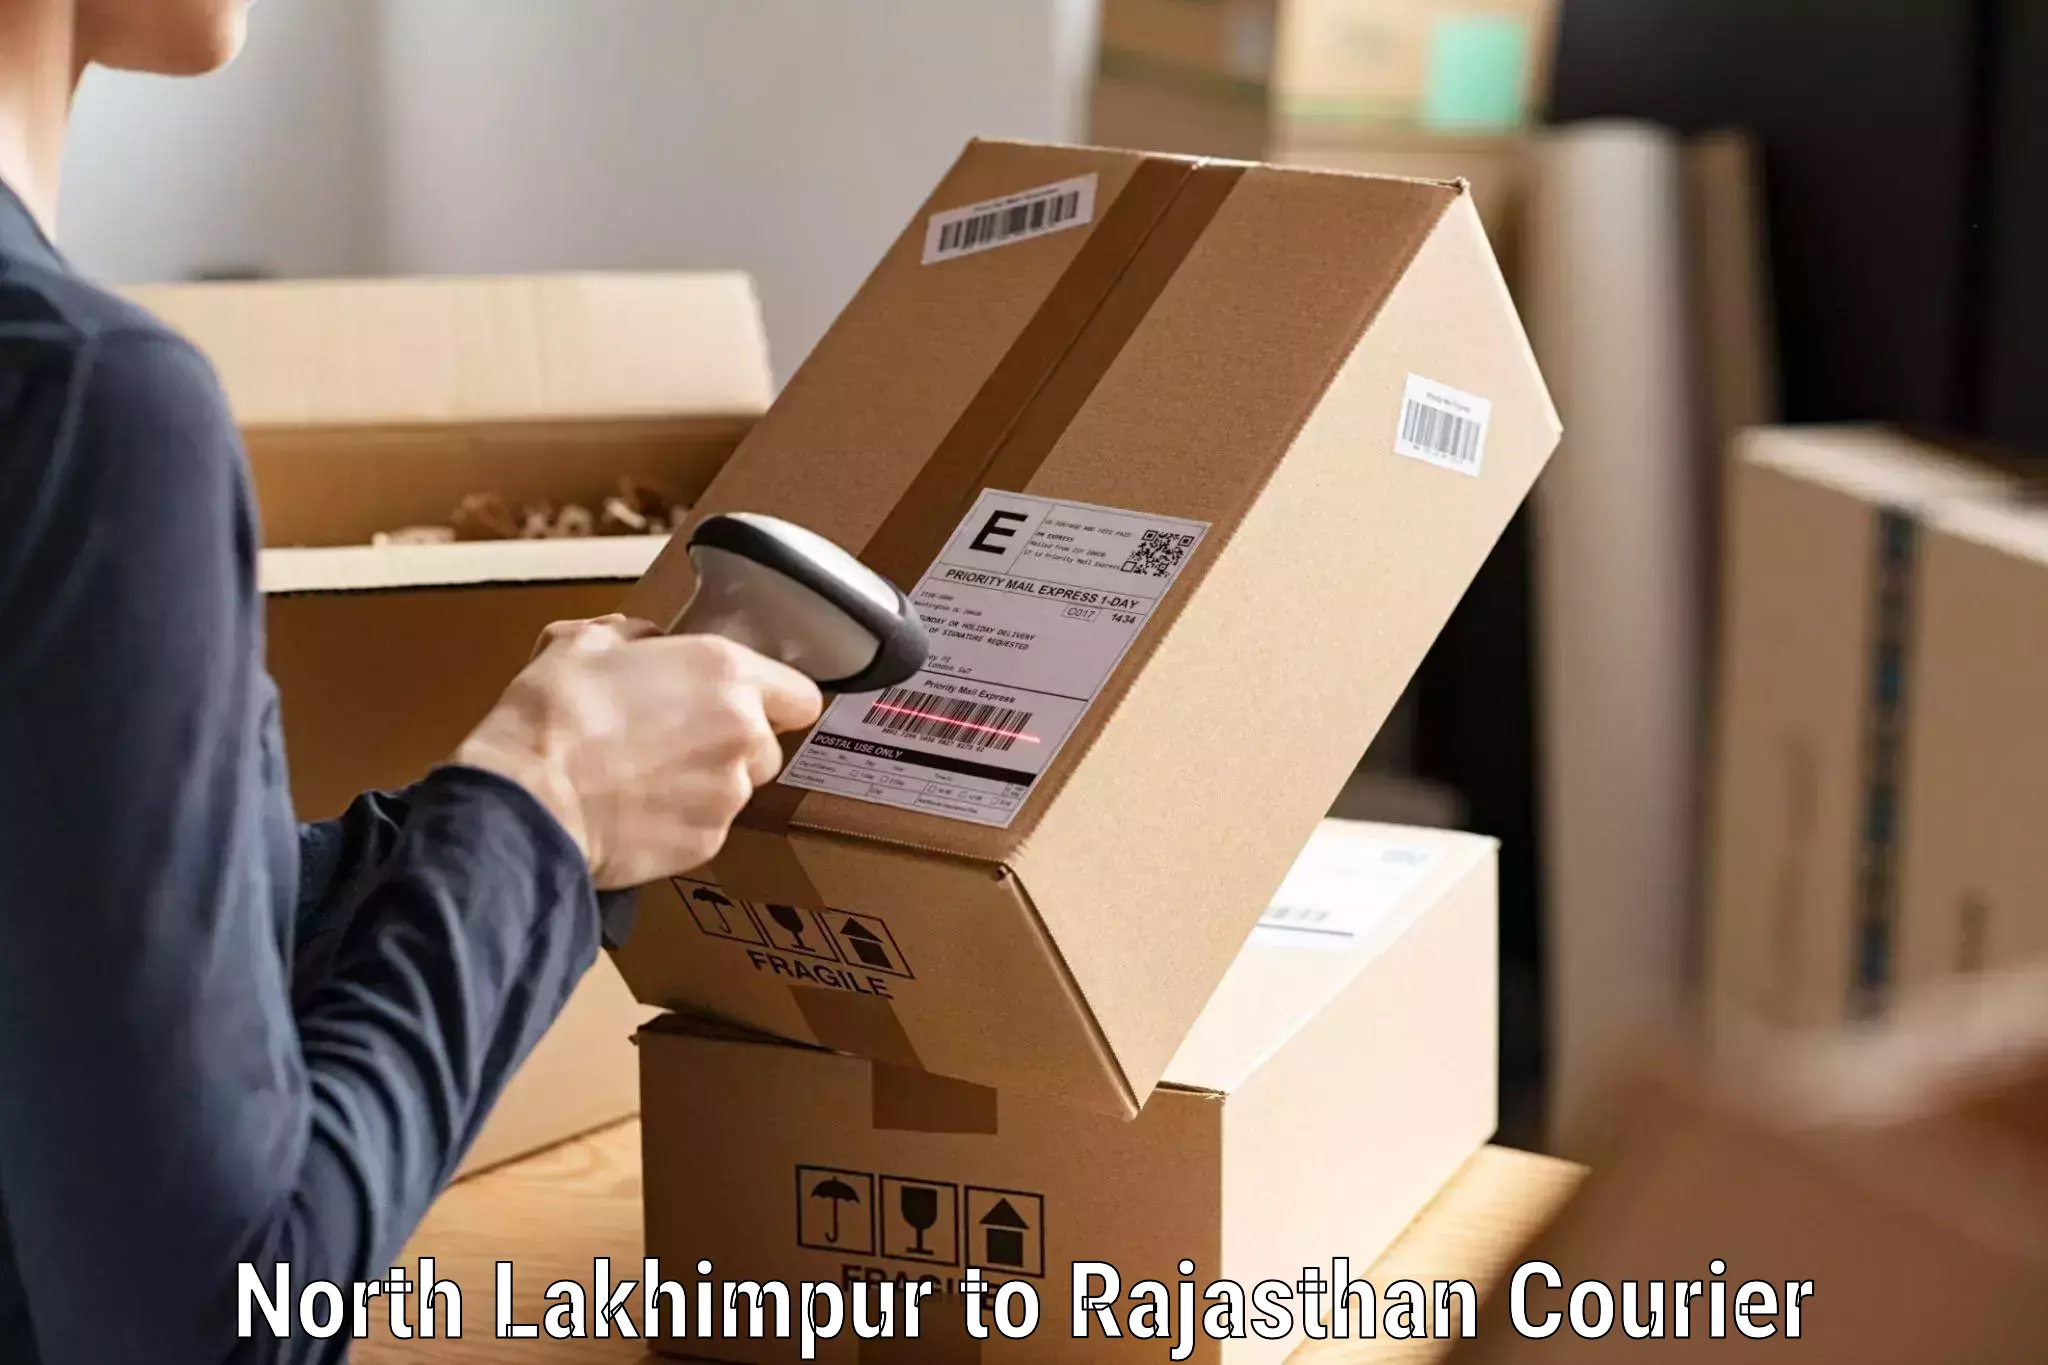 On-call courier service in North Lakhimpur to Kotputli